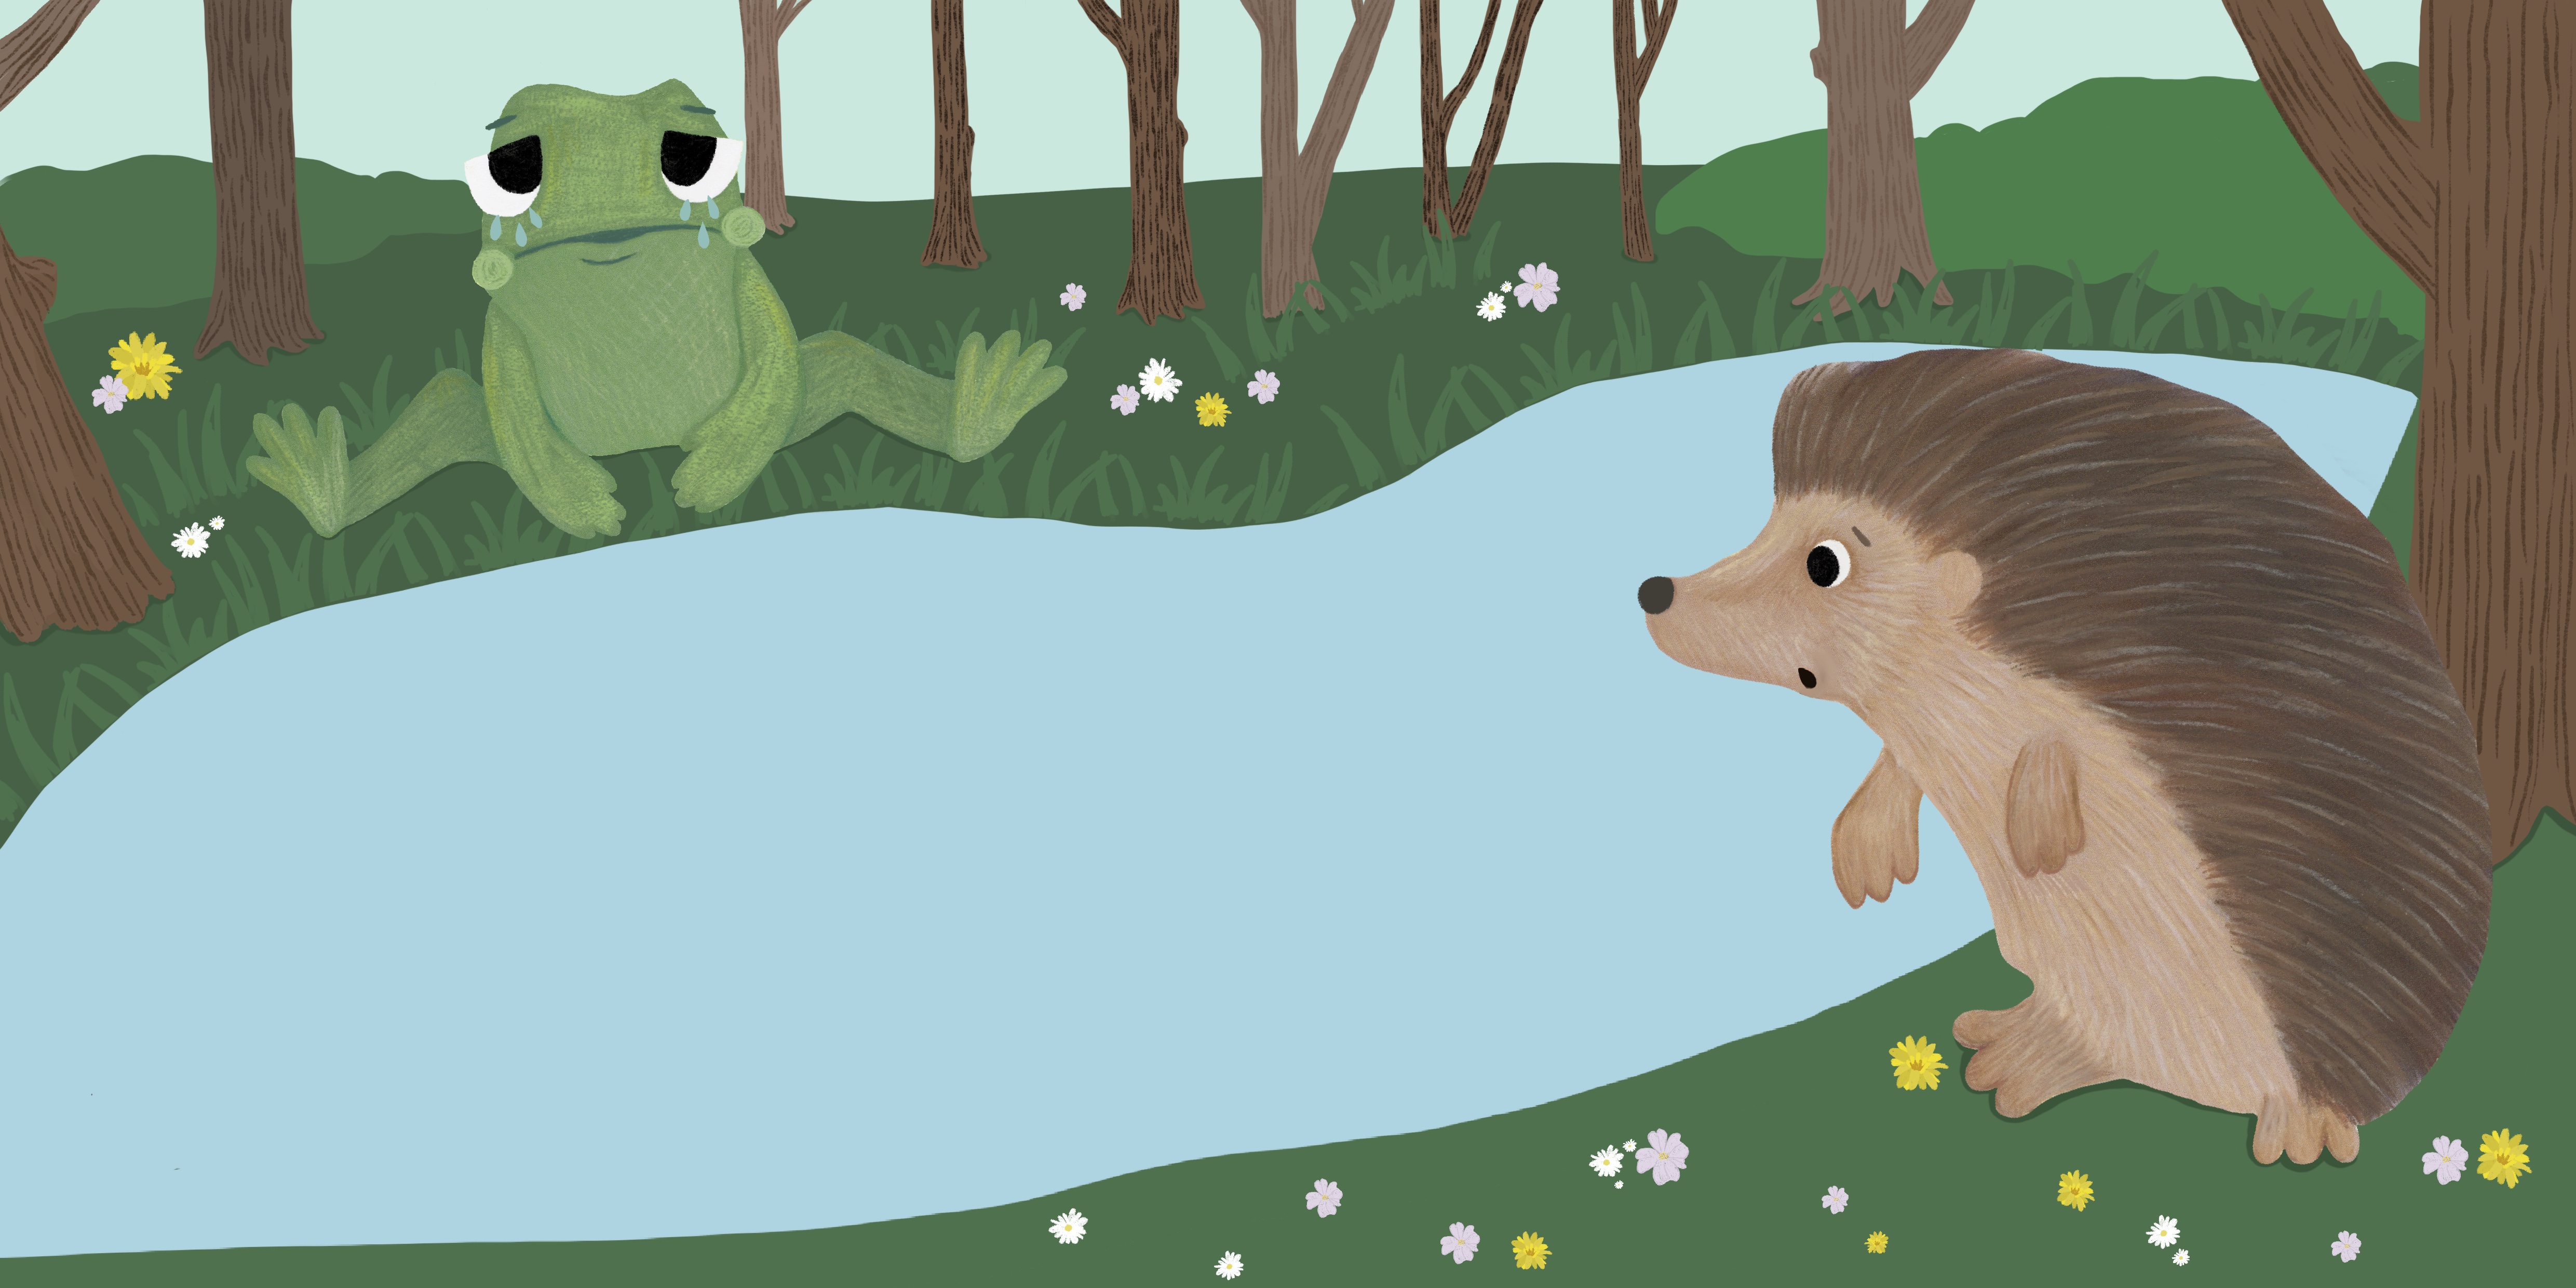 Pog the frog crying across the pond from their friend Hedgehog. Trying to make the treehouse alone but failing.